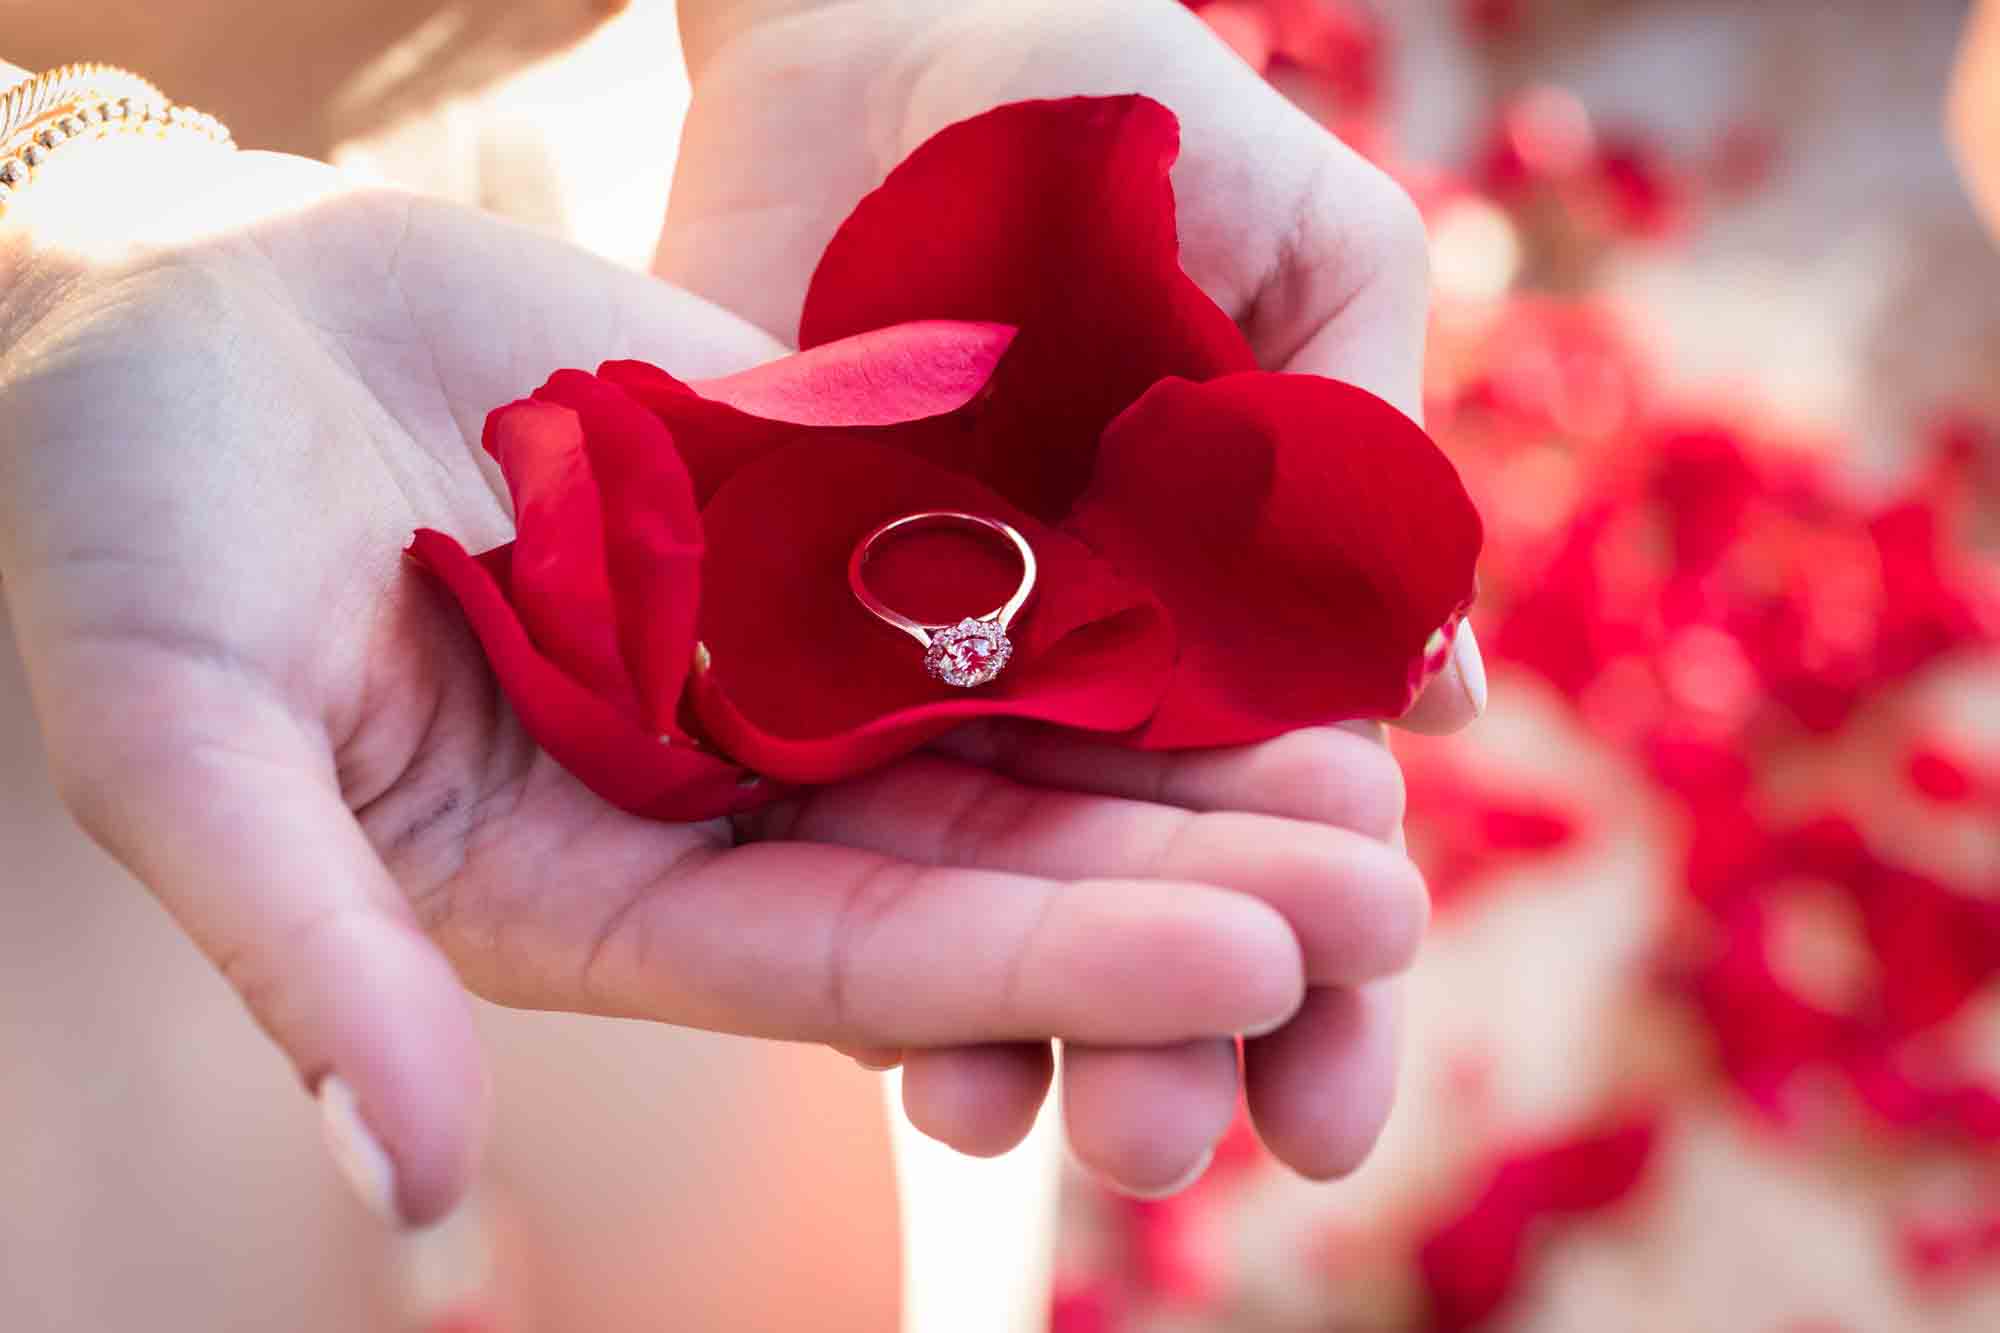 Close up of woman's hands with red rose petals and engagement ring in her palm